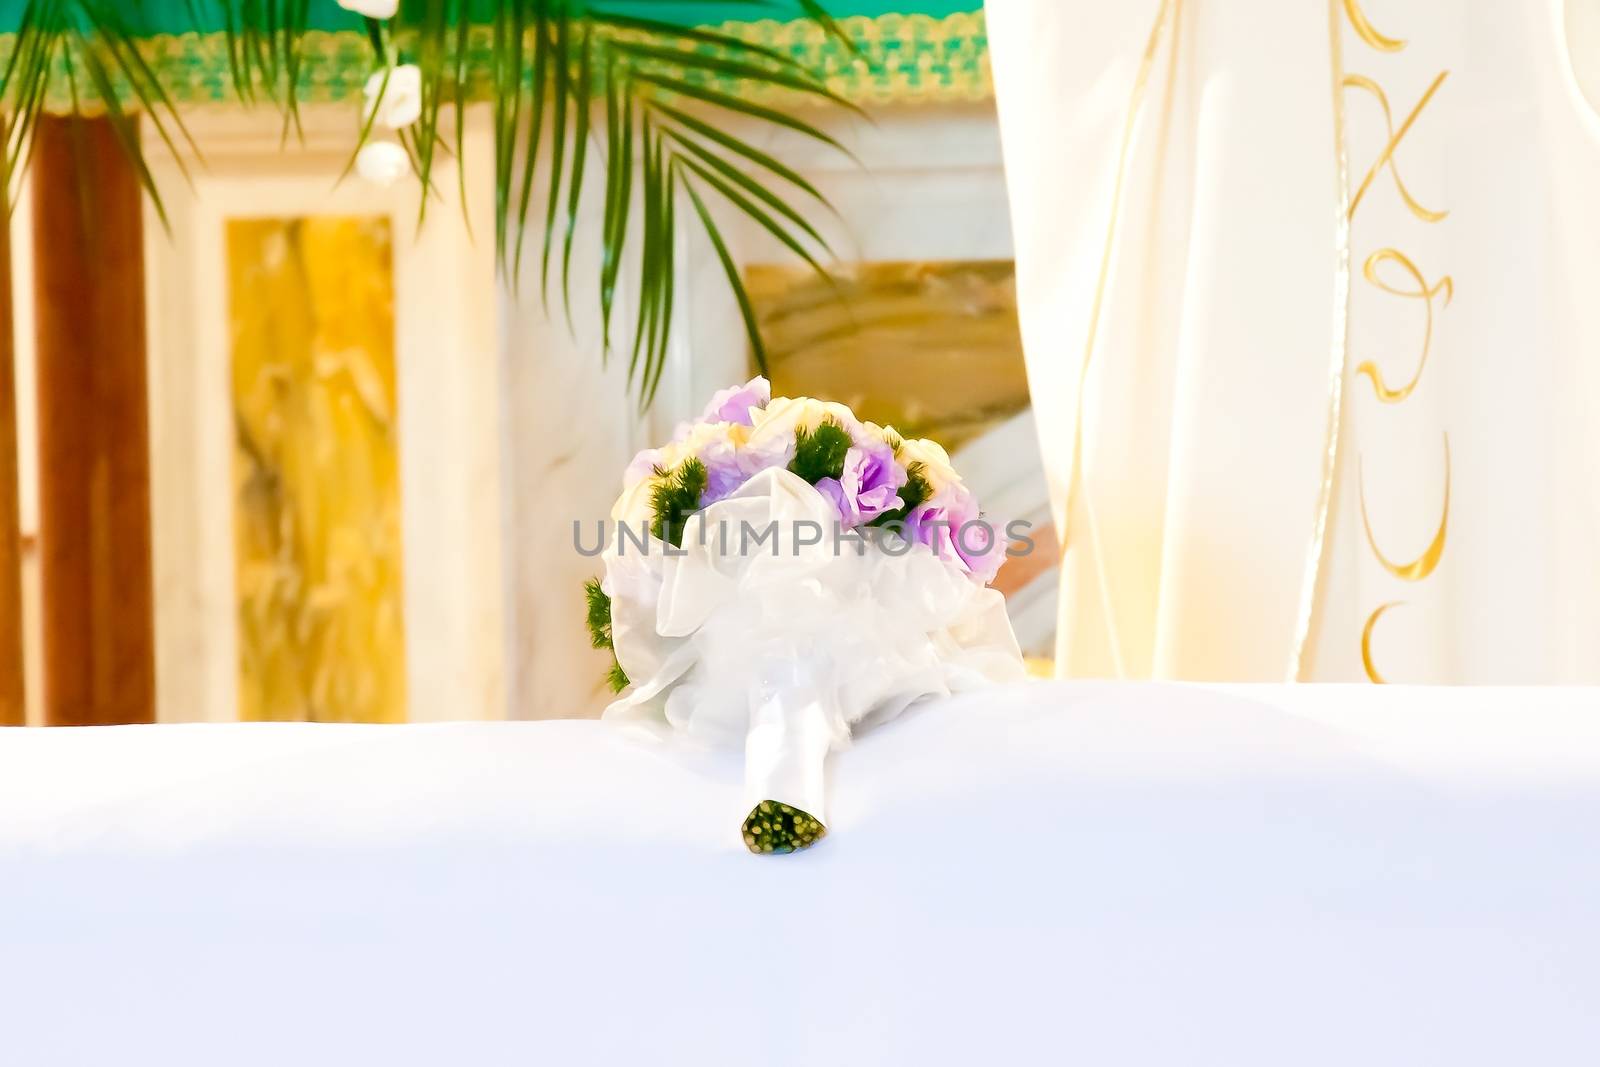 wedding bouquet in the church on the table by donfiore